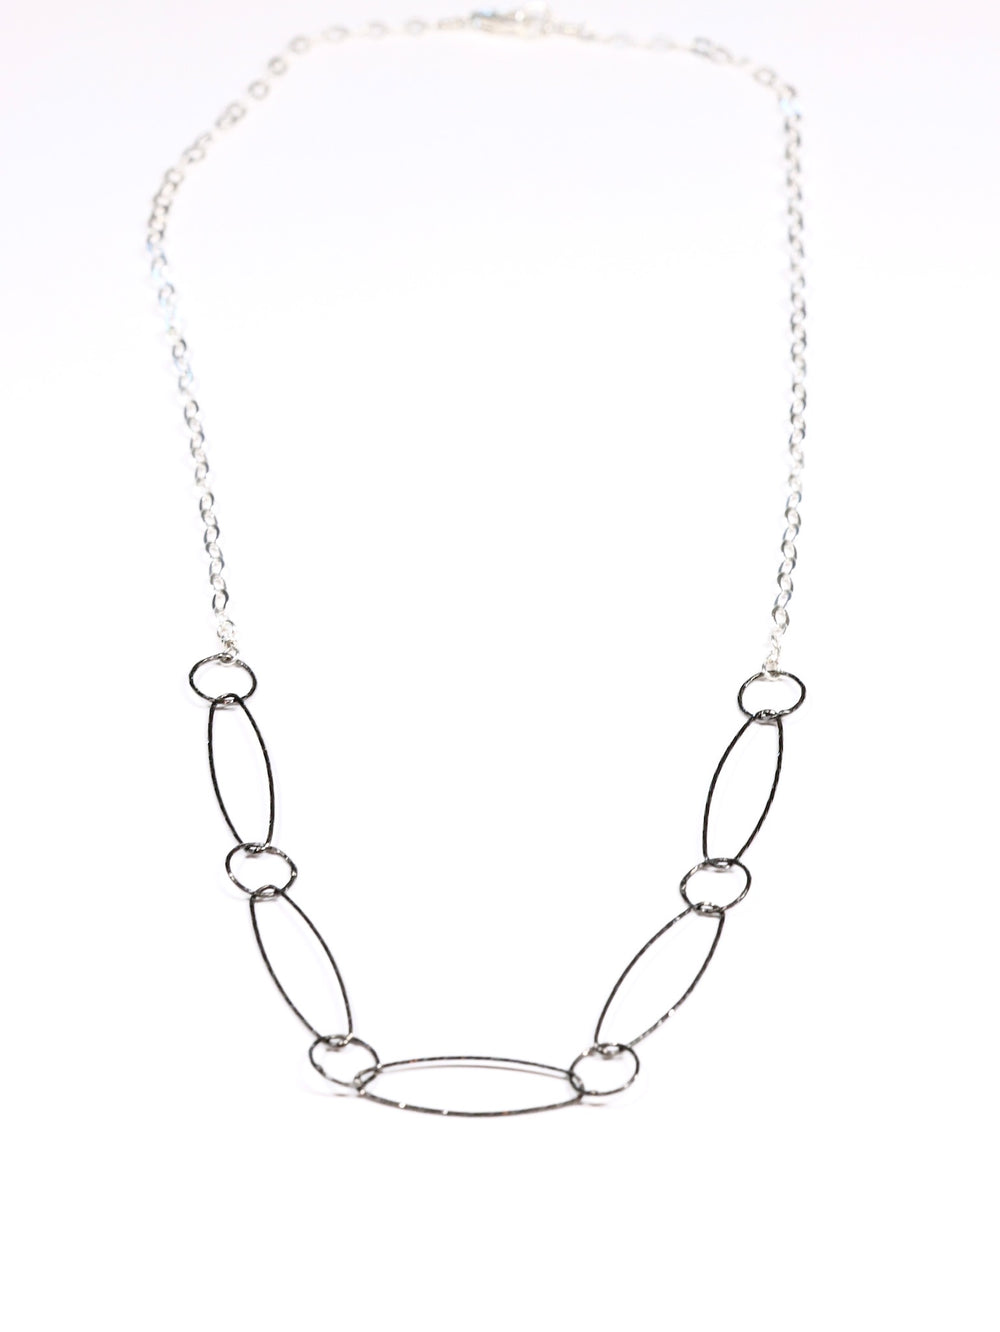 5 Links Necklace - Black and Silver